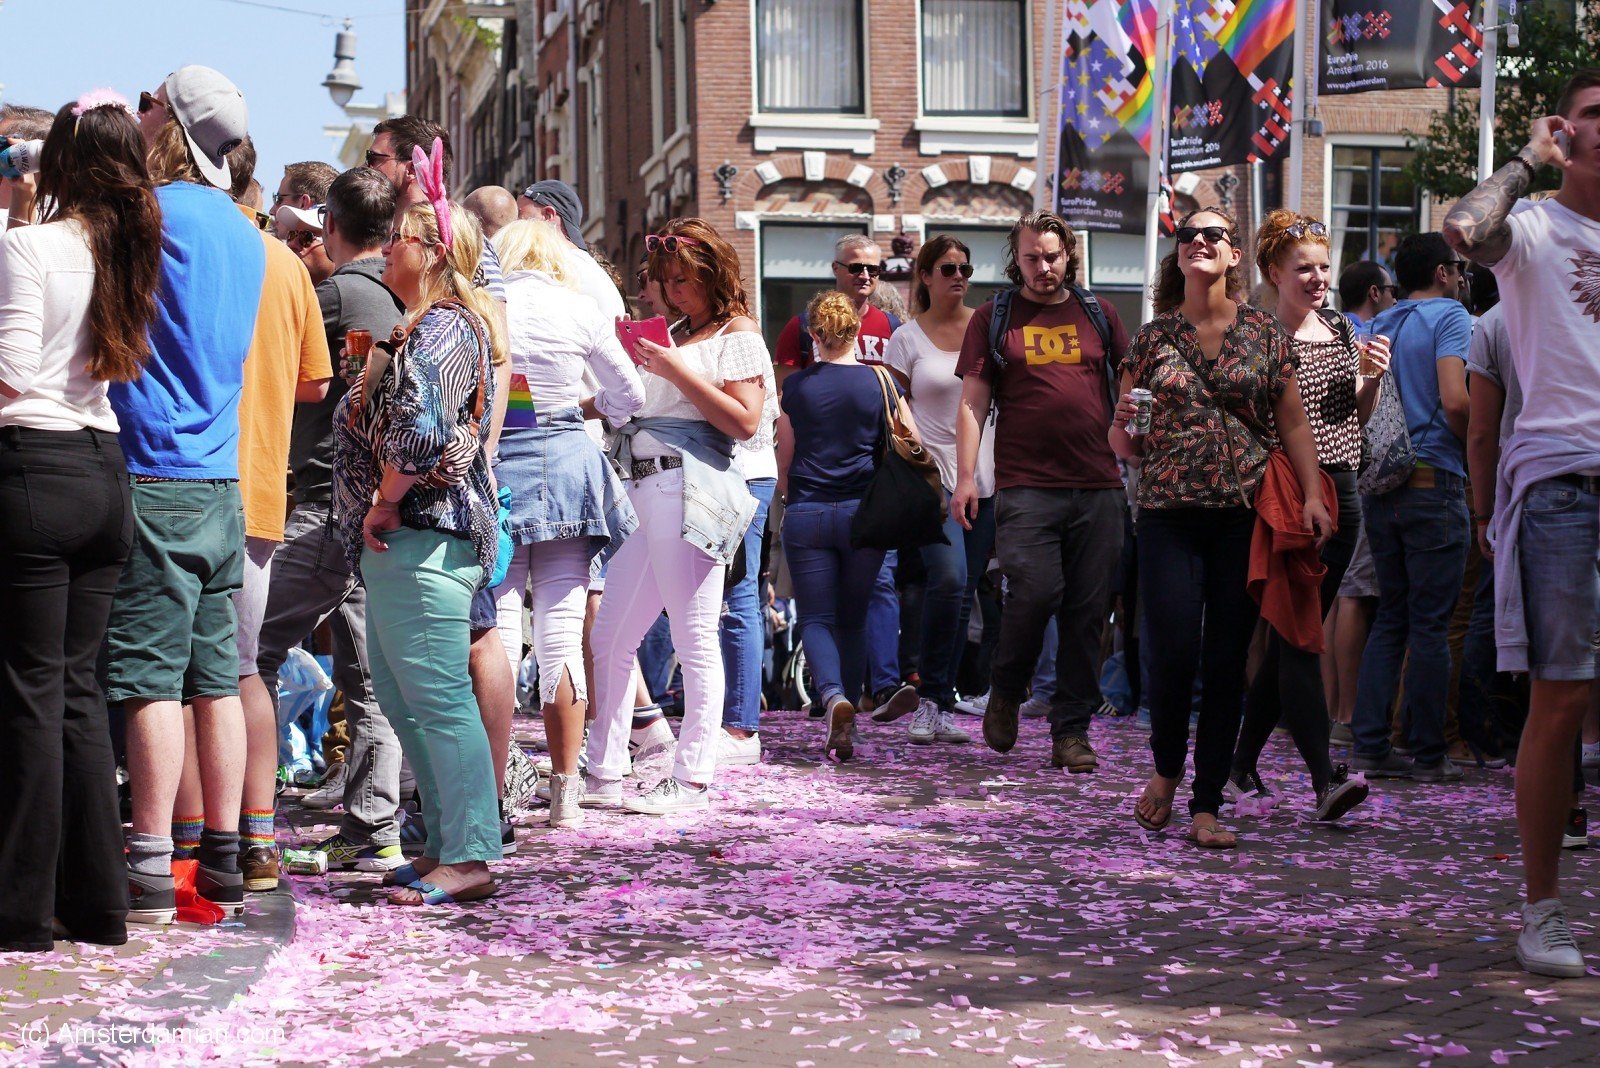 EuroPride Amsterdam – the audience | Amsterdamian